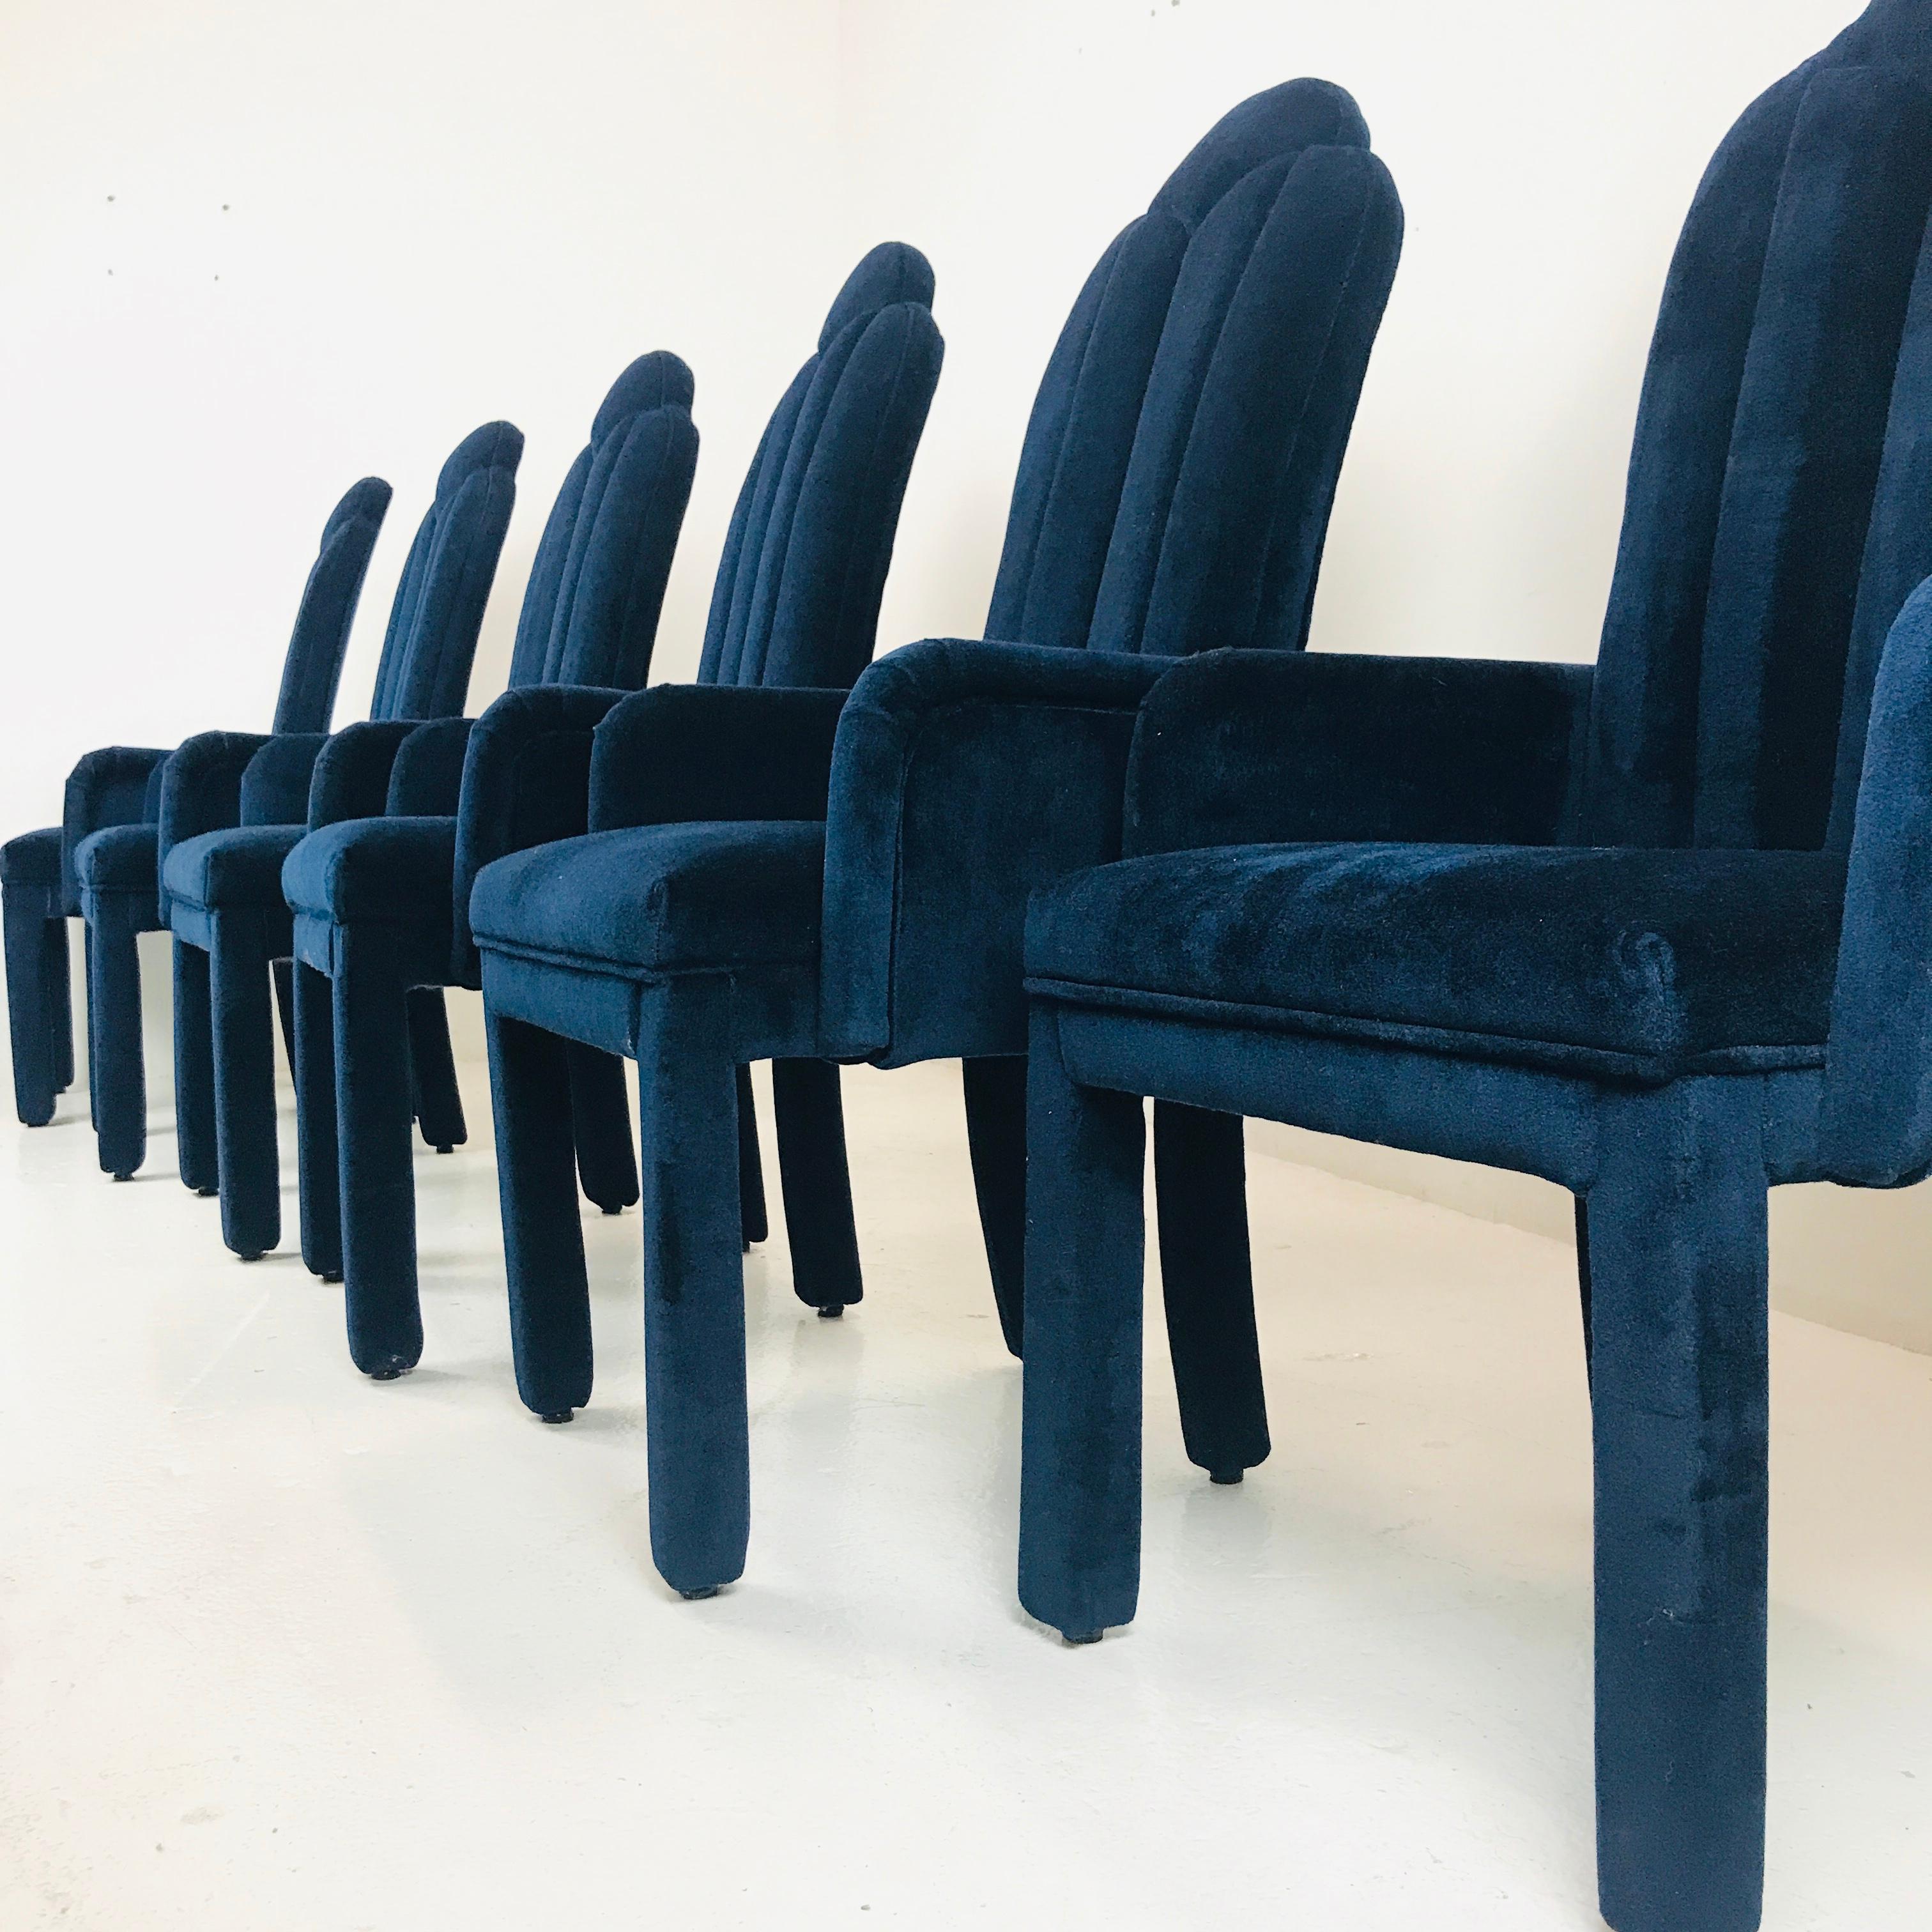 Set of 6 regal, cobalt blue mohair dining chairs by Milo Baughman with tall channel backs.